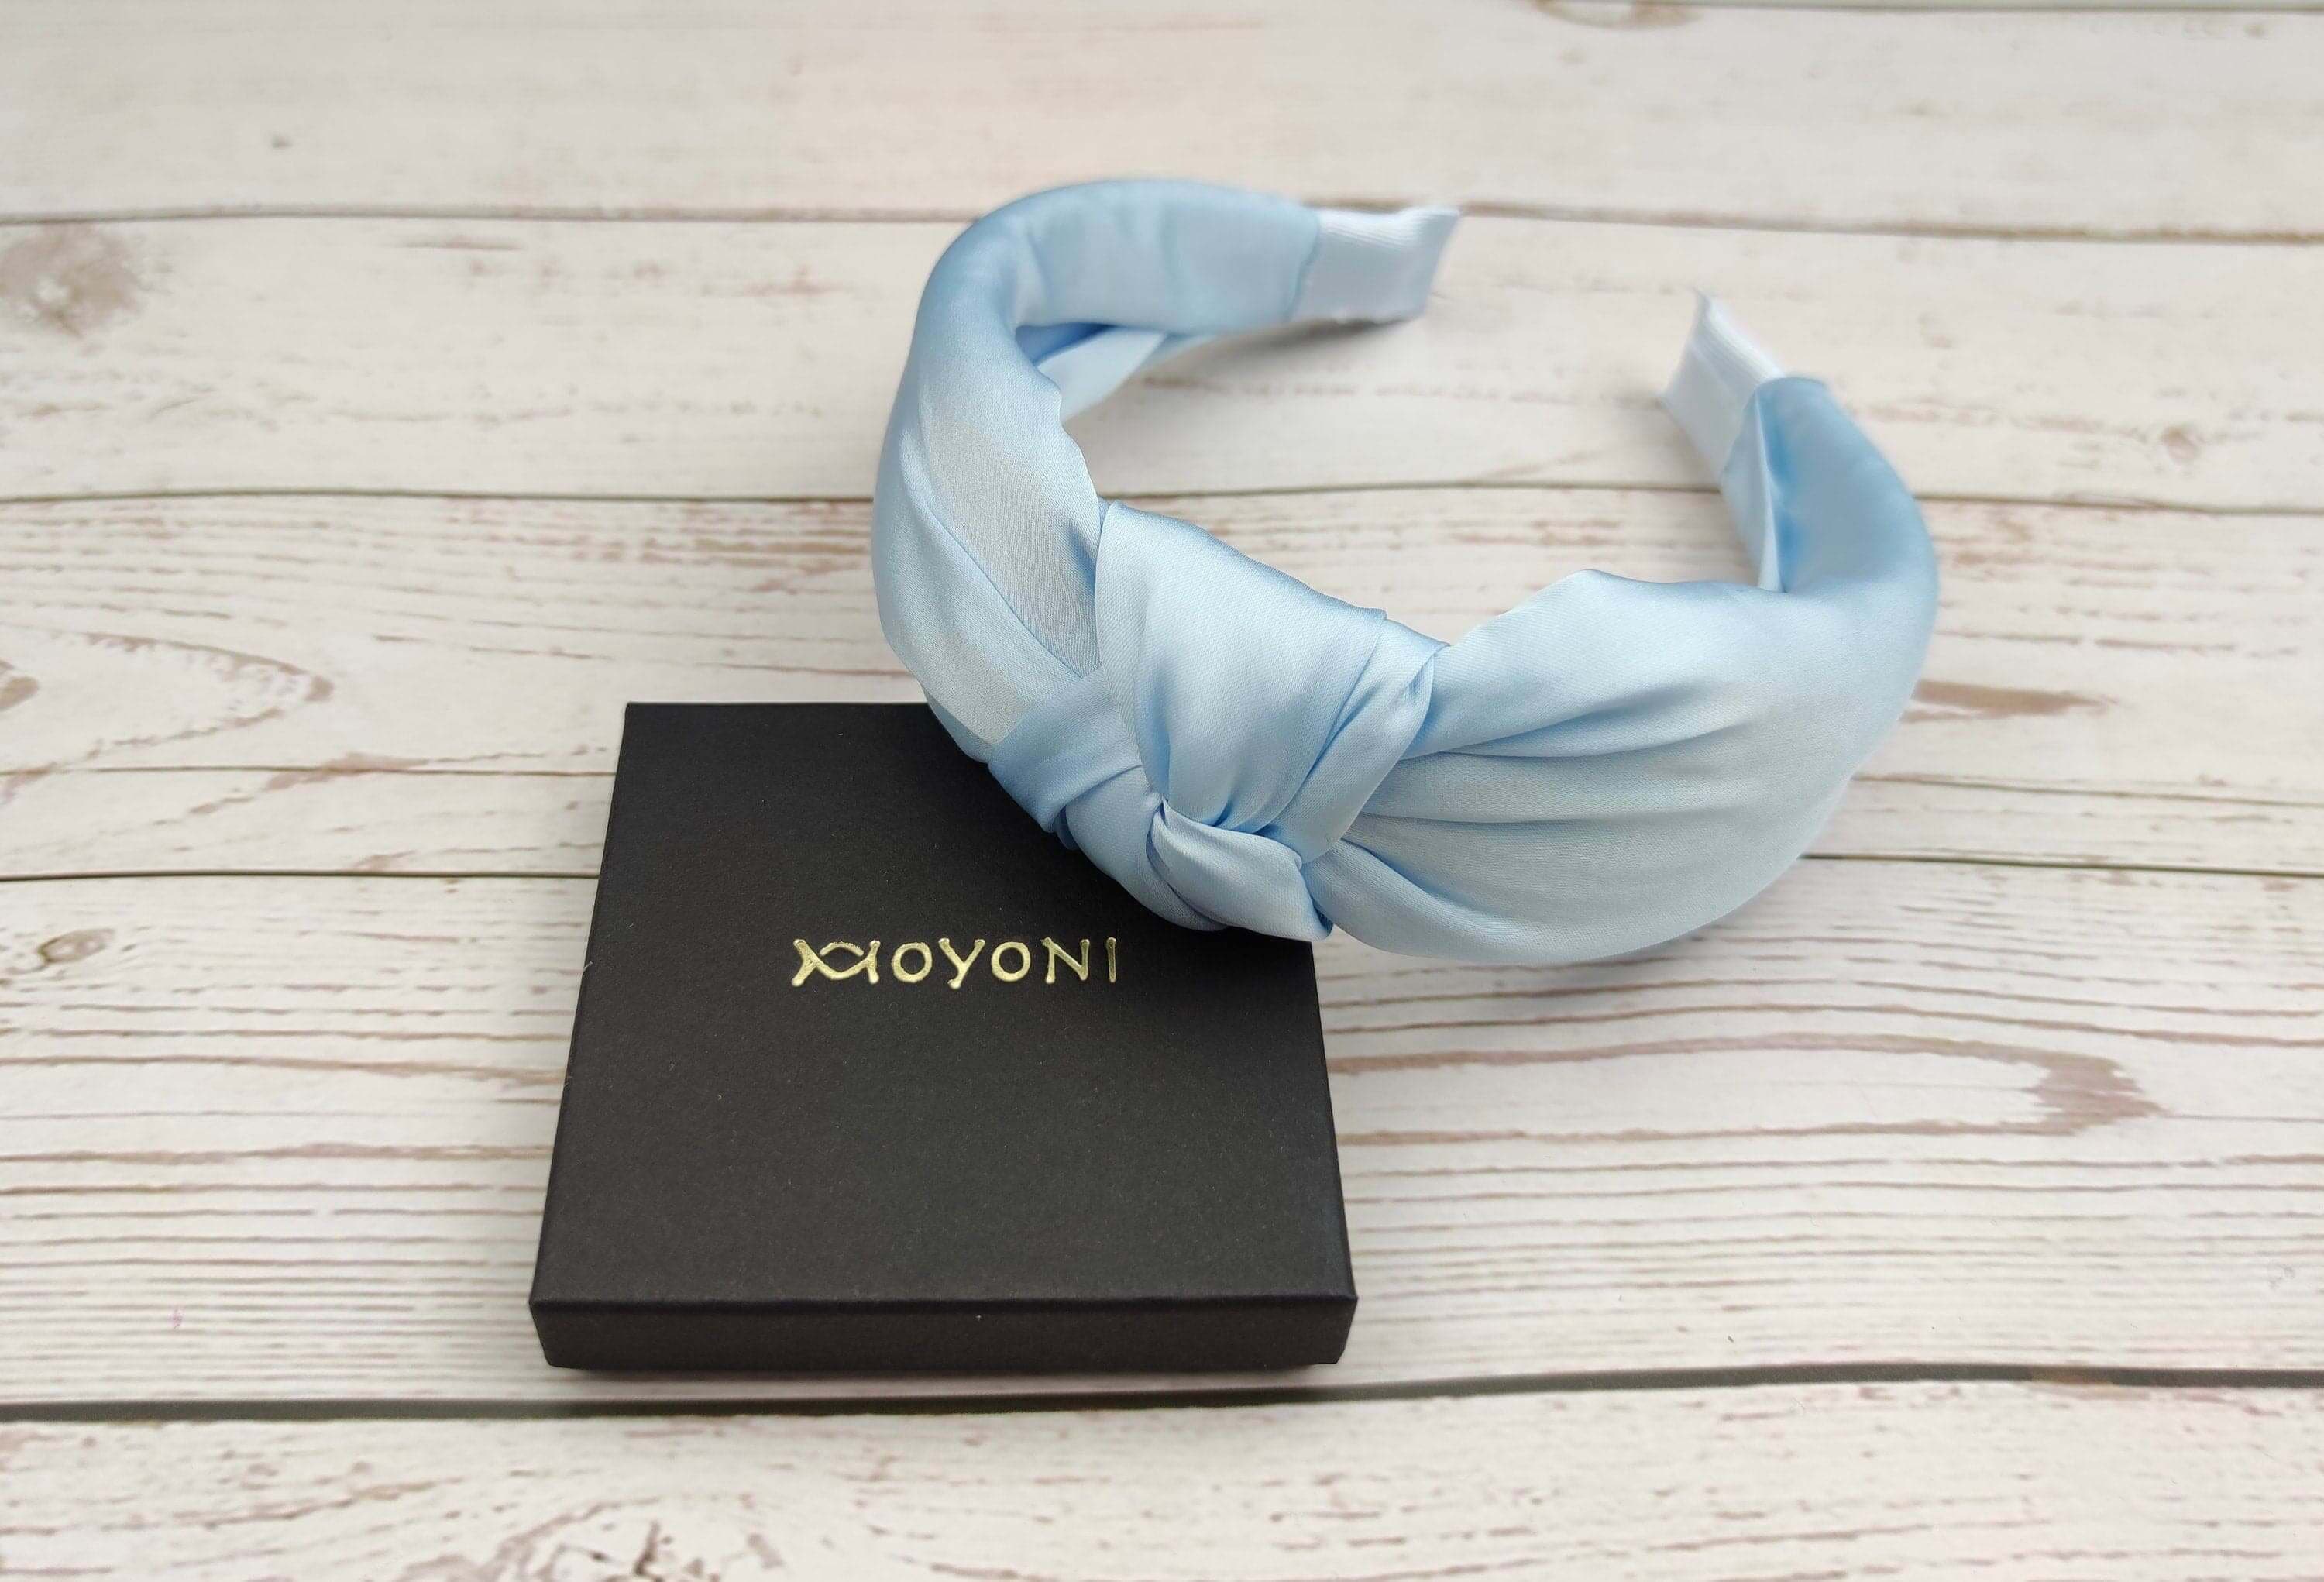 Add some glamour to your look with a chic headband. Made from soft and comfortable fabric, this headband will keep your hair in place all day long.